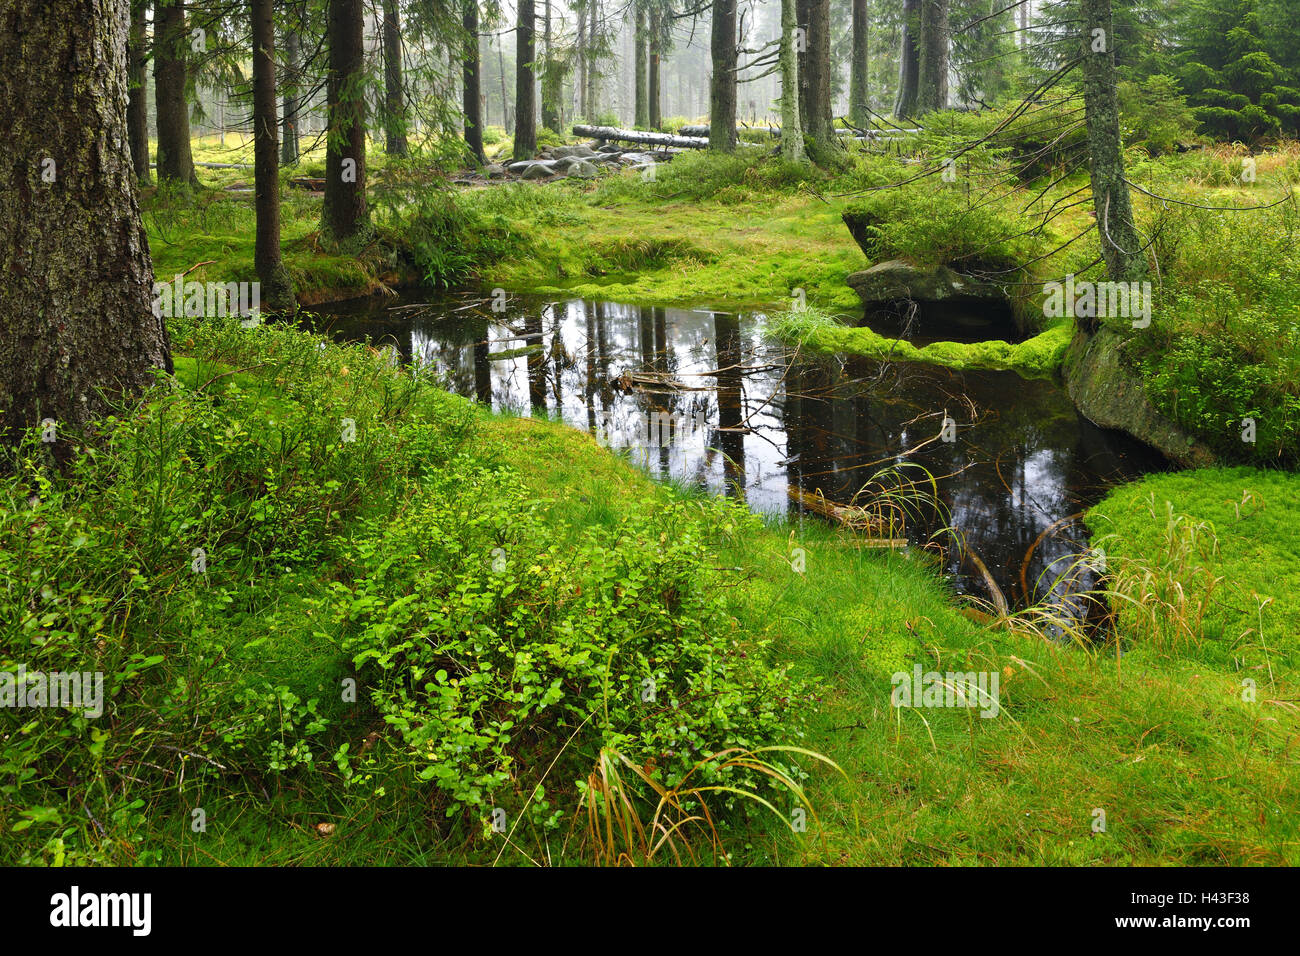 Germany, Lower Saxony, National Park Harz, spruce forest with moor pool, Stock Photo